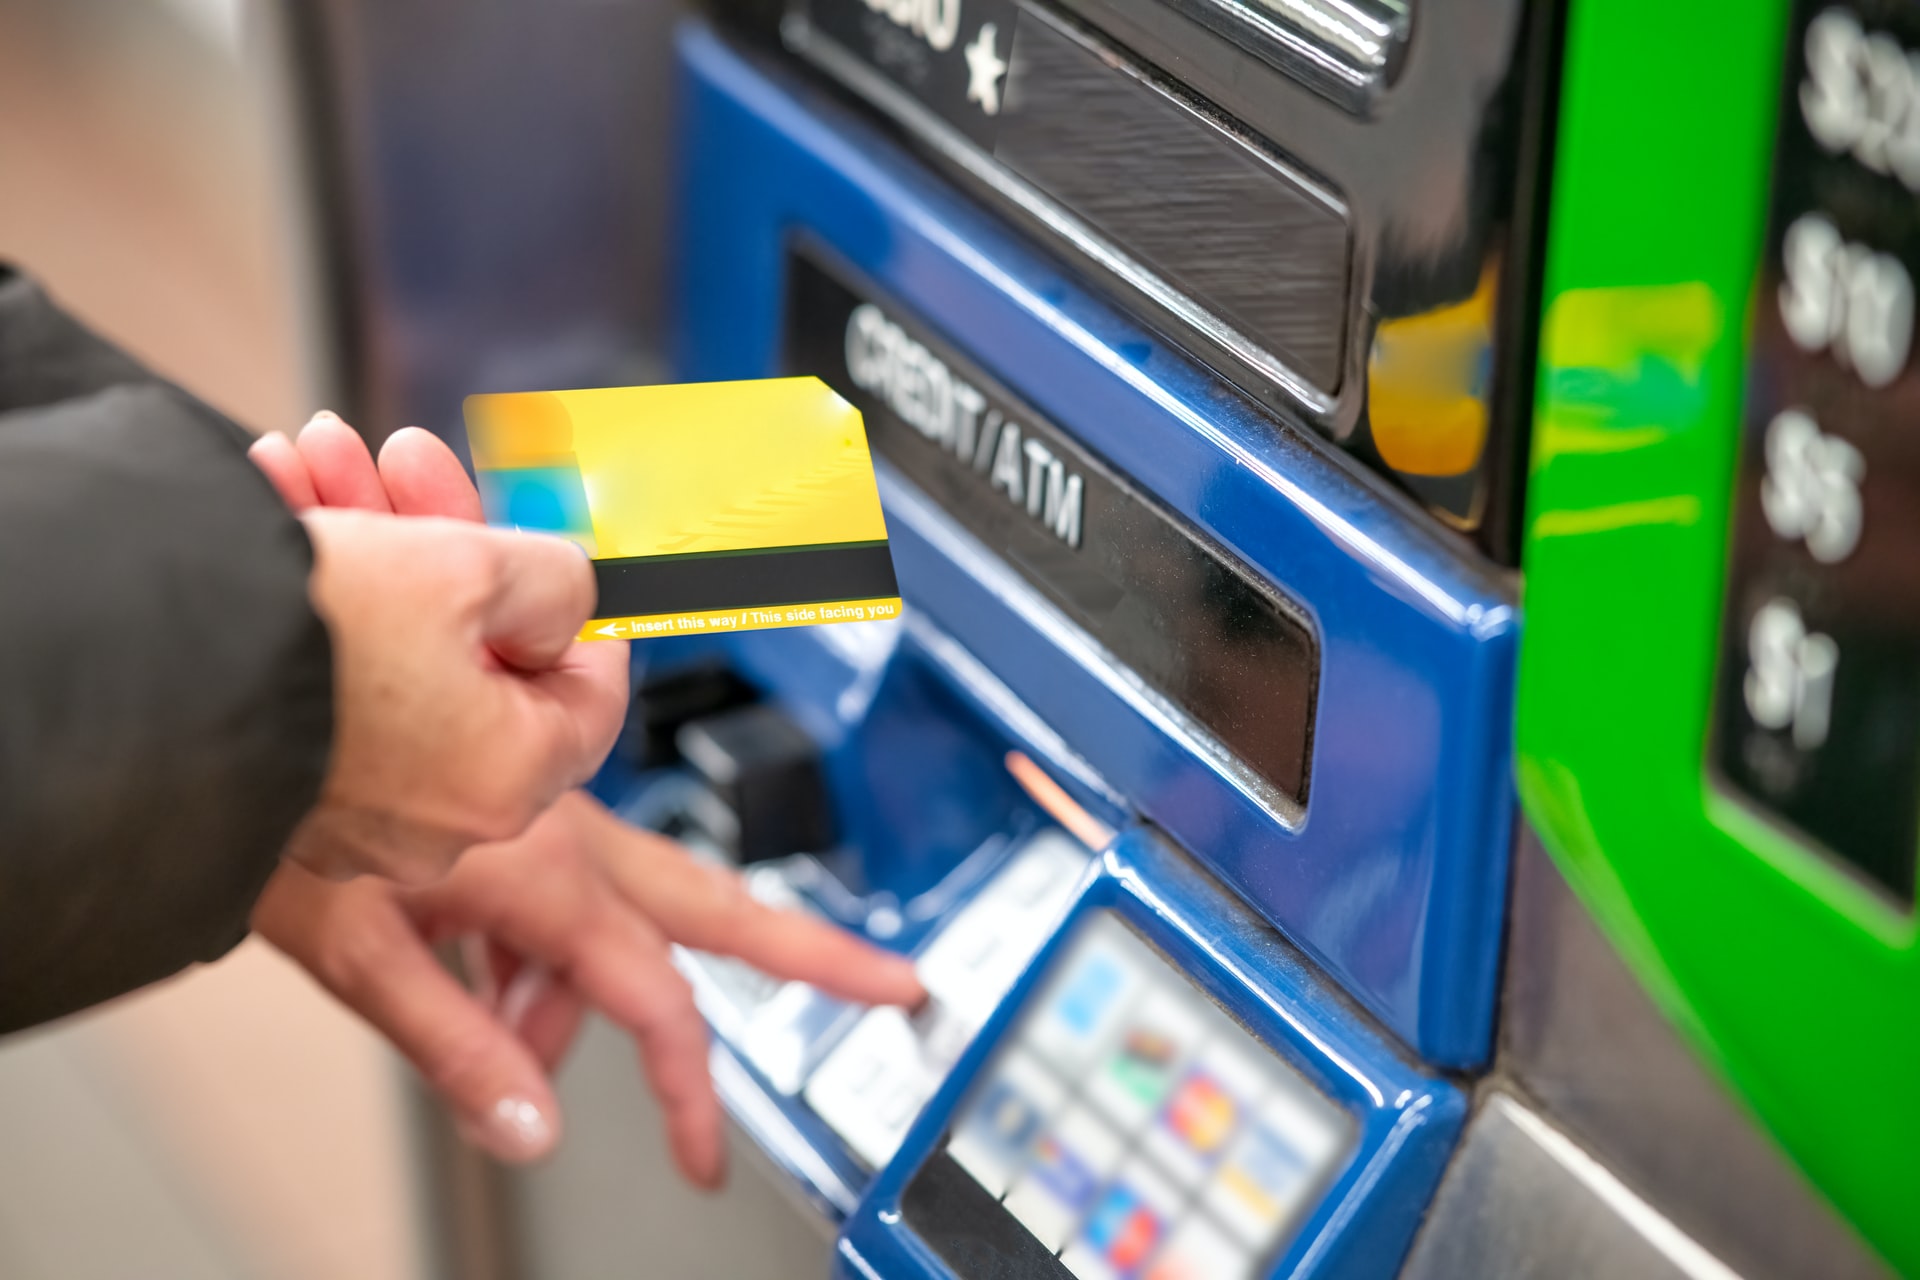 See all the benefits and disadvantages of using an ATM card in your life! Source: Unsplash